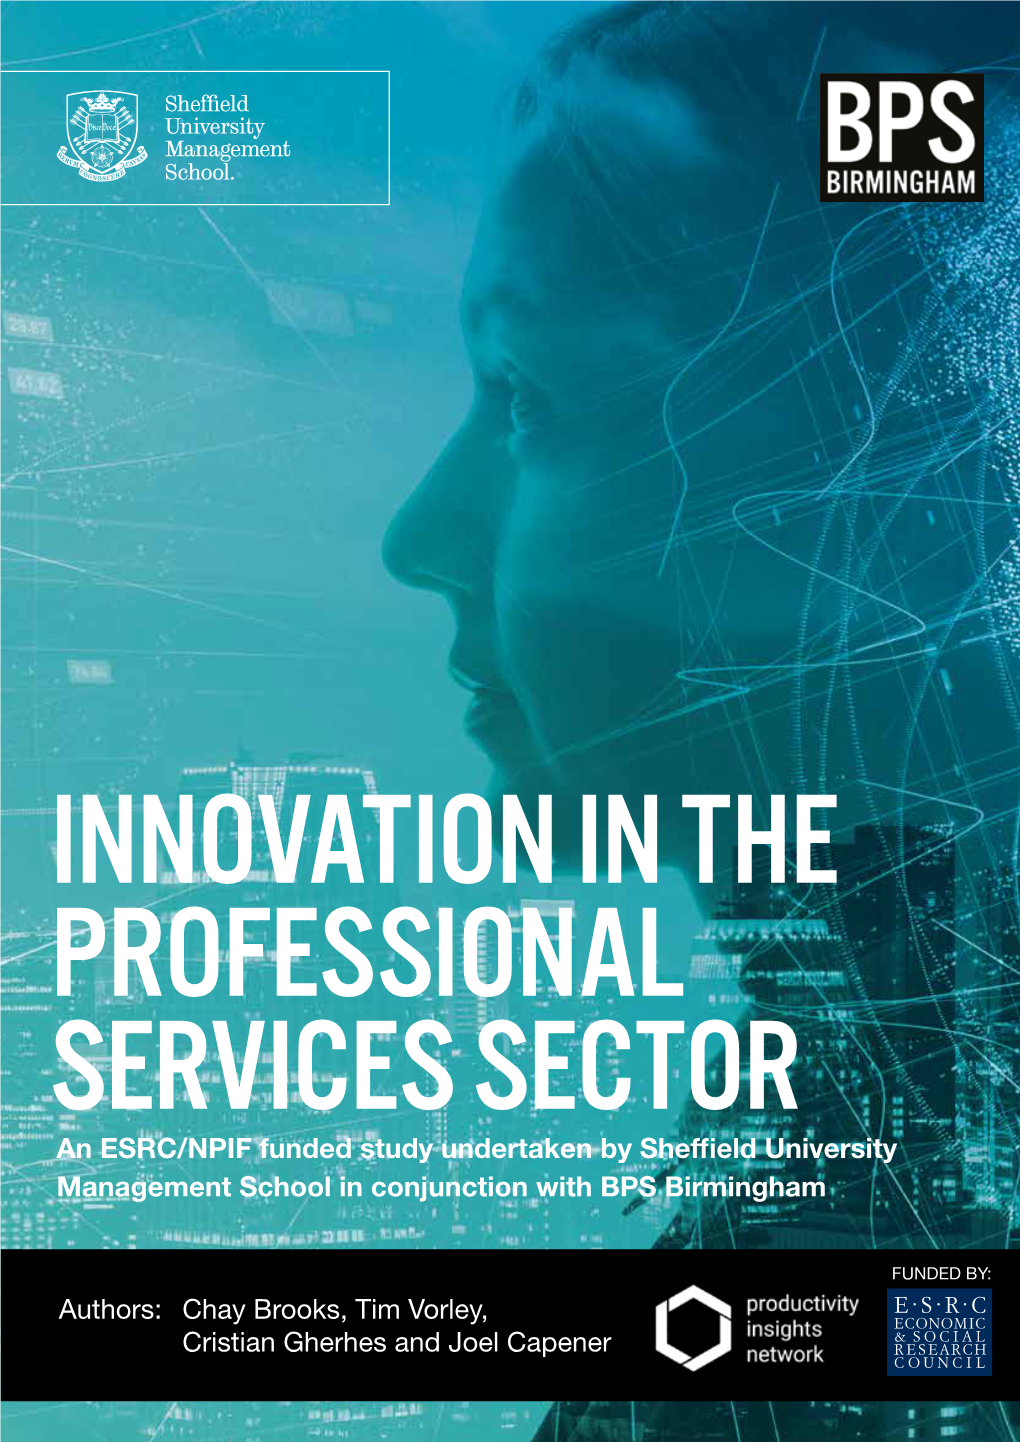 INNOVATION in the PROFESSIONAL SERVICES SECTOR an ESRC/NPIF Funded Study Undertaken by Sheffield University Management School in Conjunction with BPS Birmingham